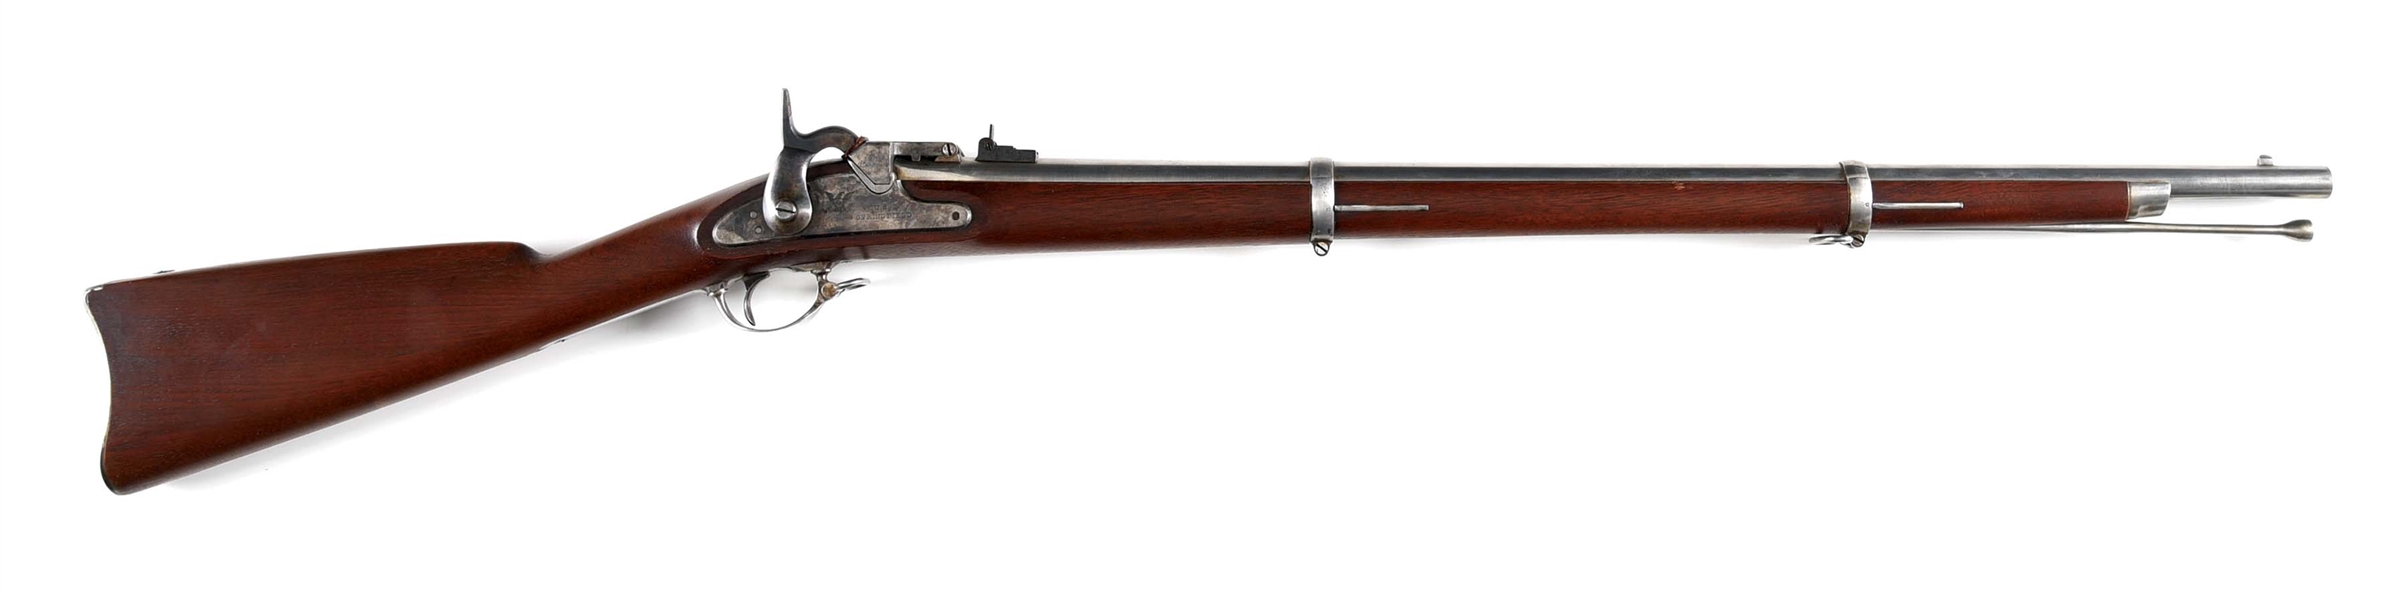 (A) RARE MILLER CONVERSION OF 1861 SPRINGFIELD RIFLE.